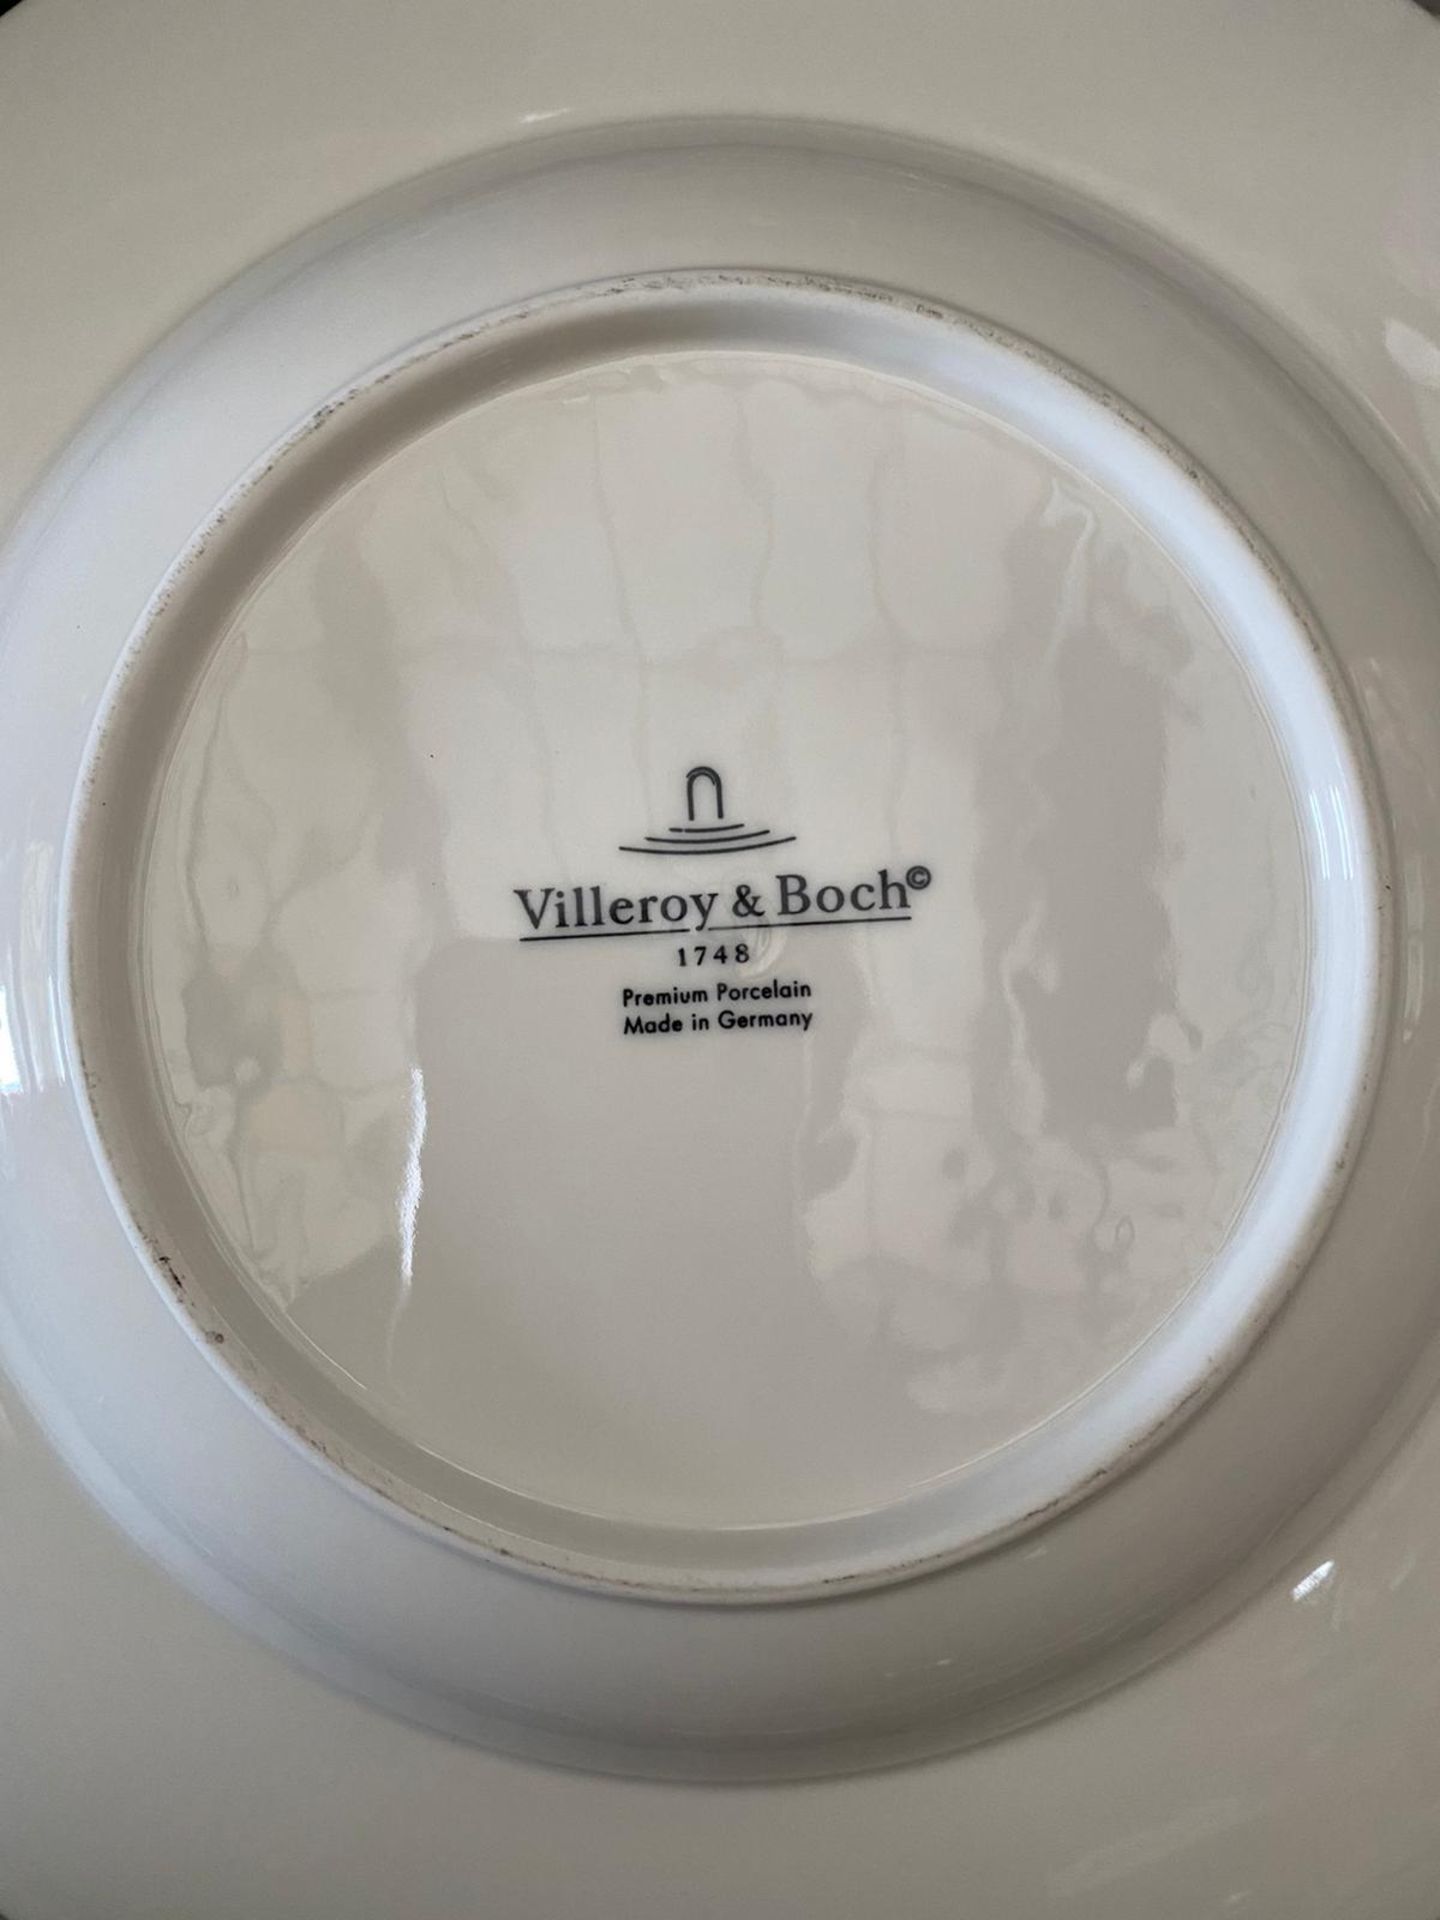 6 x Villeroy & Boch Royal Dinner Plate - 290mm (29cm) - Ref: 1044122620 - New and Boxed -